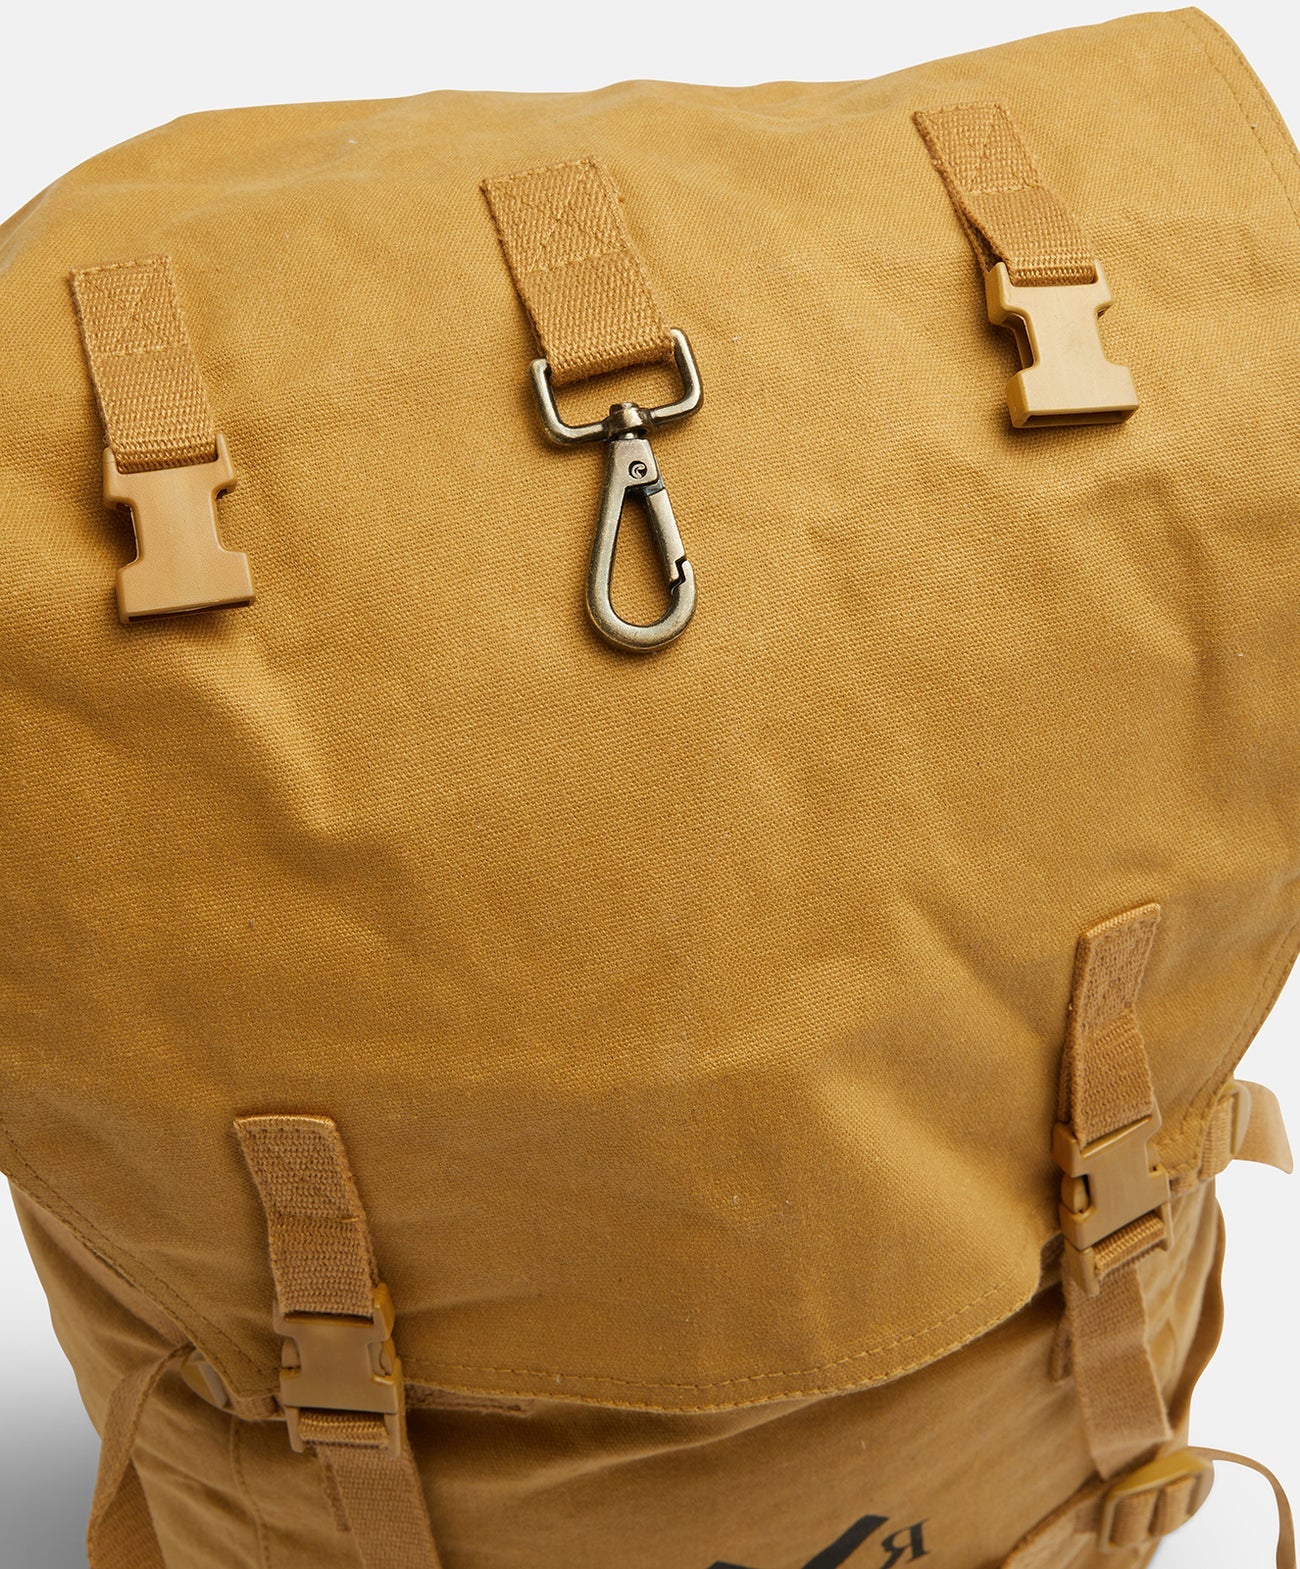 Slow Road Waxed Canvas Backpack with Cover by Pony Rider